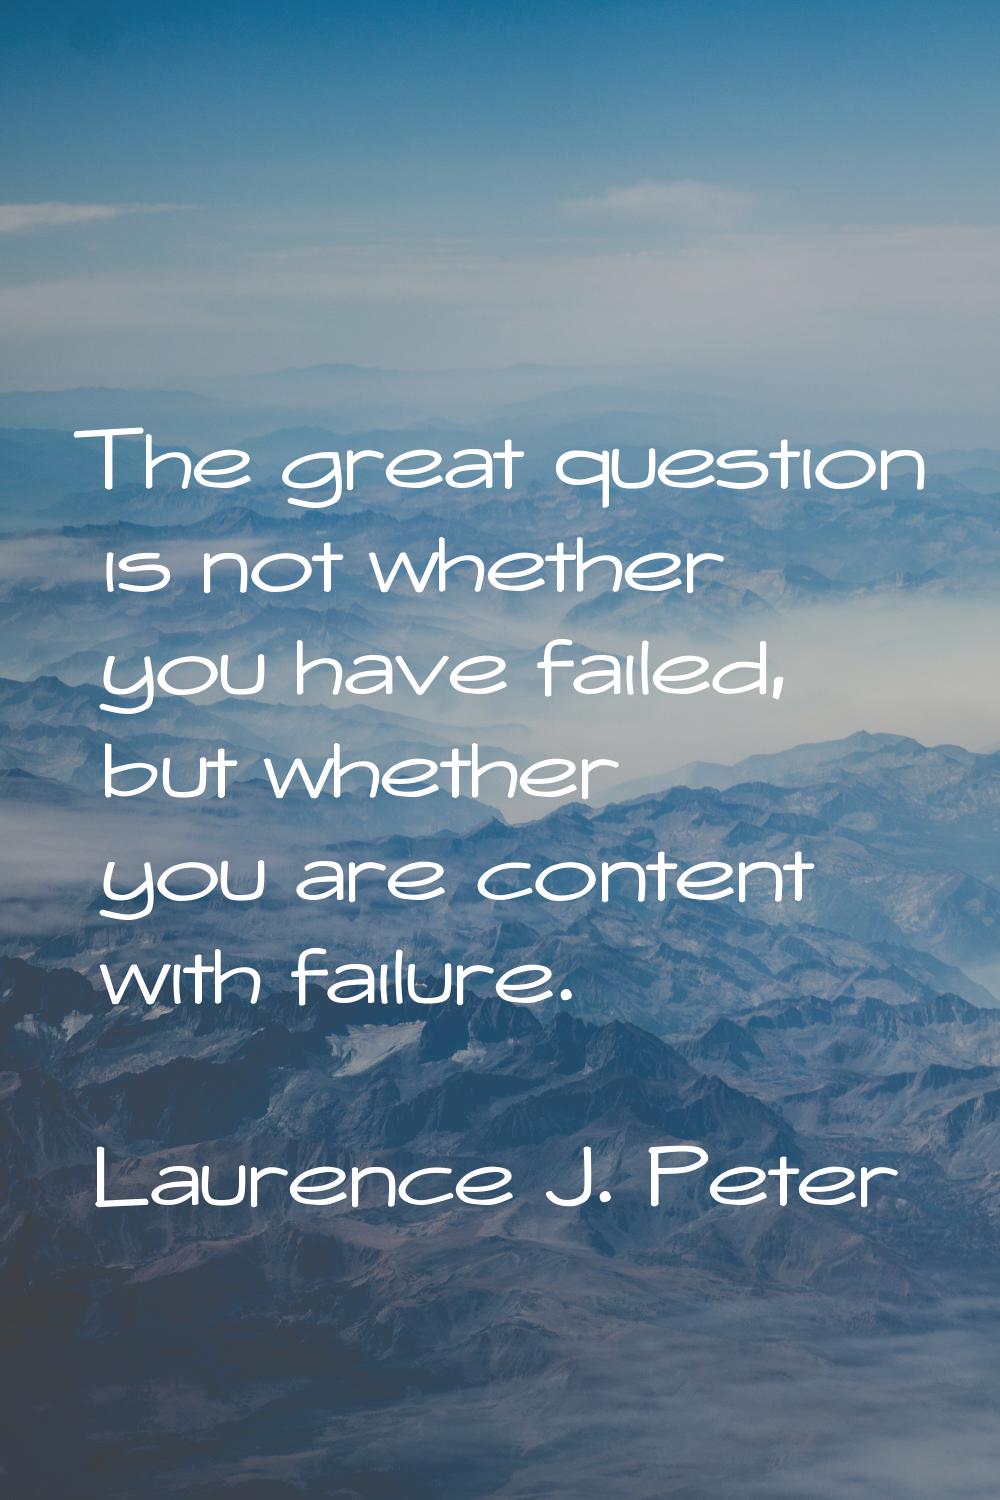 The great question is not whether you have failed, but whether you are content with failure.